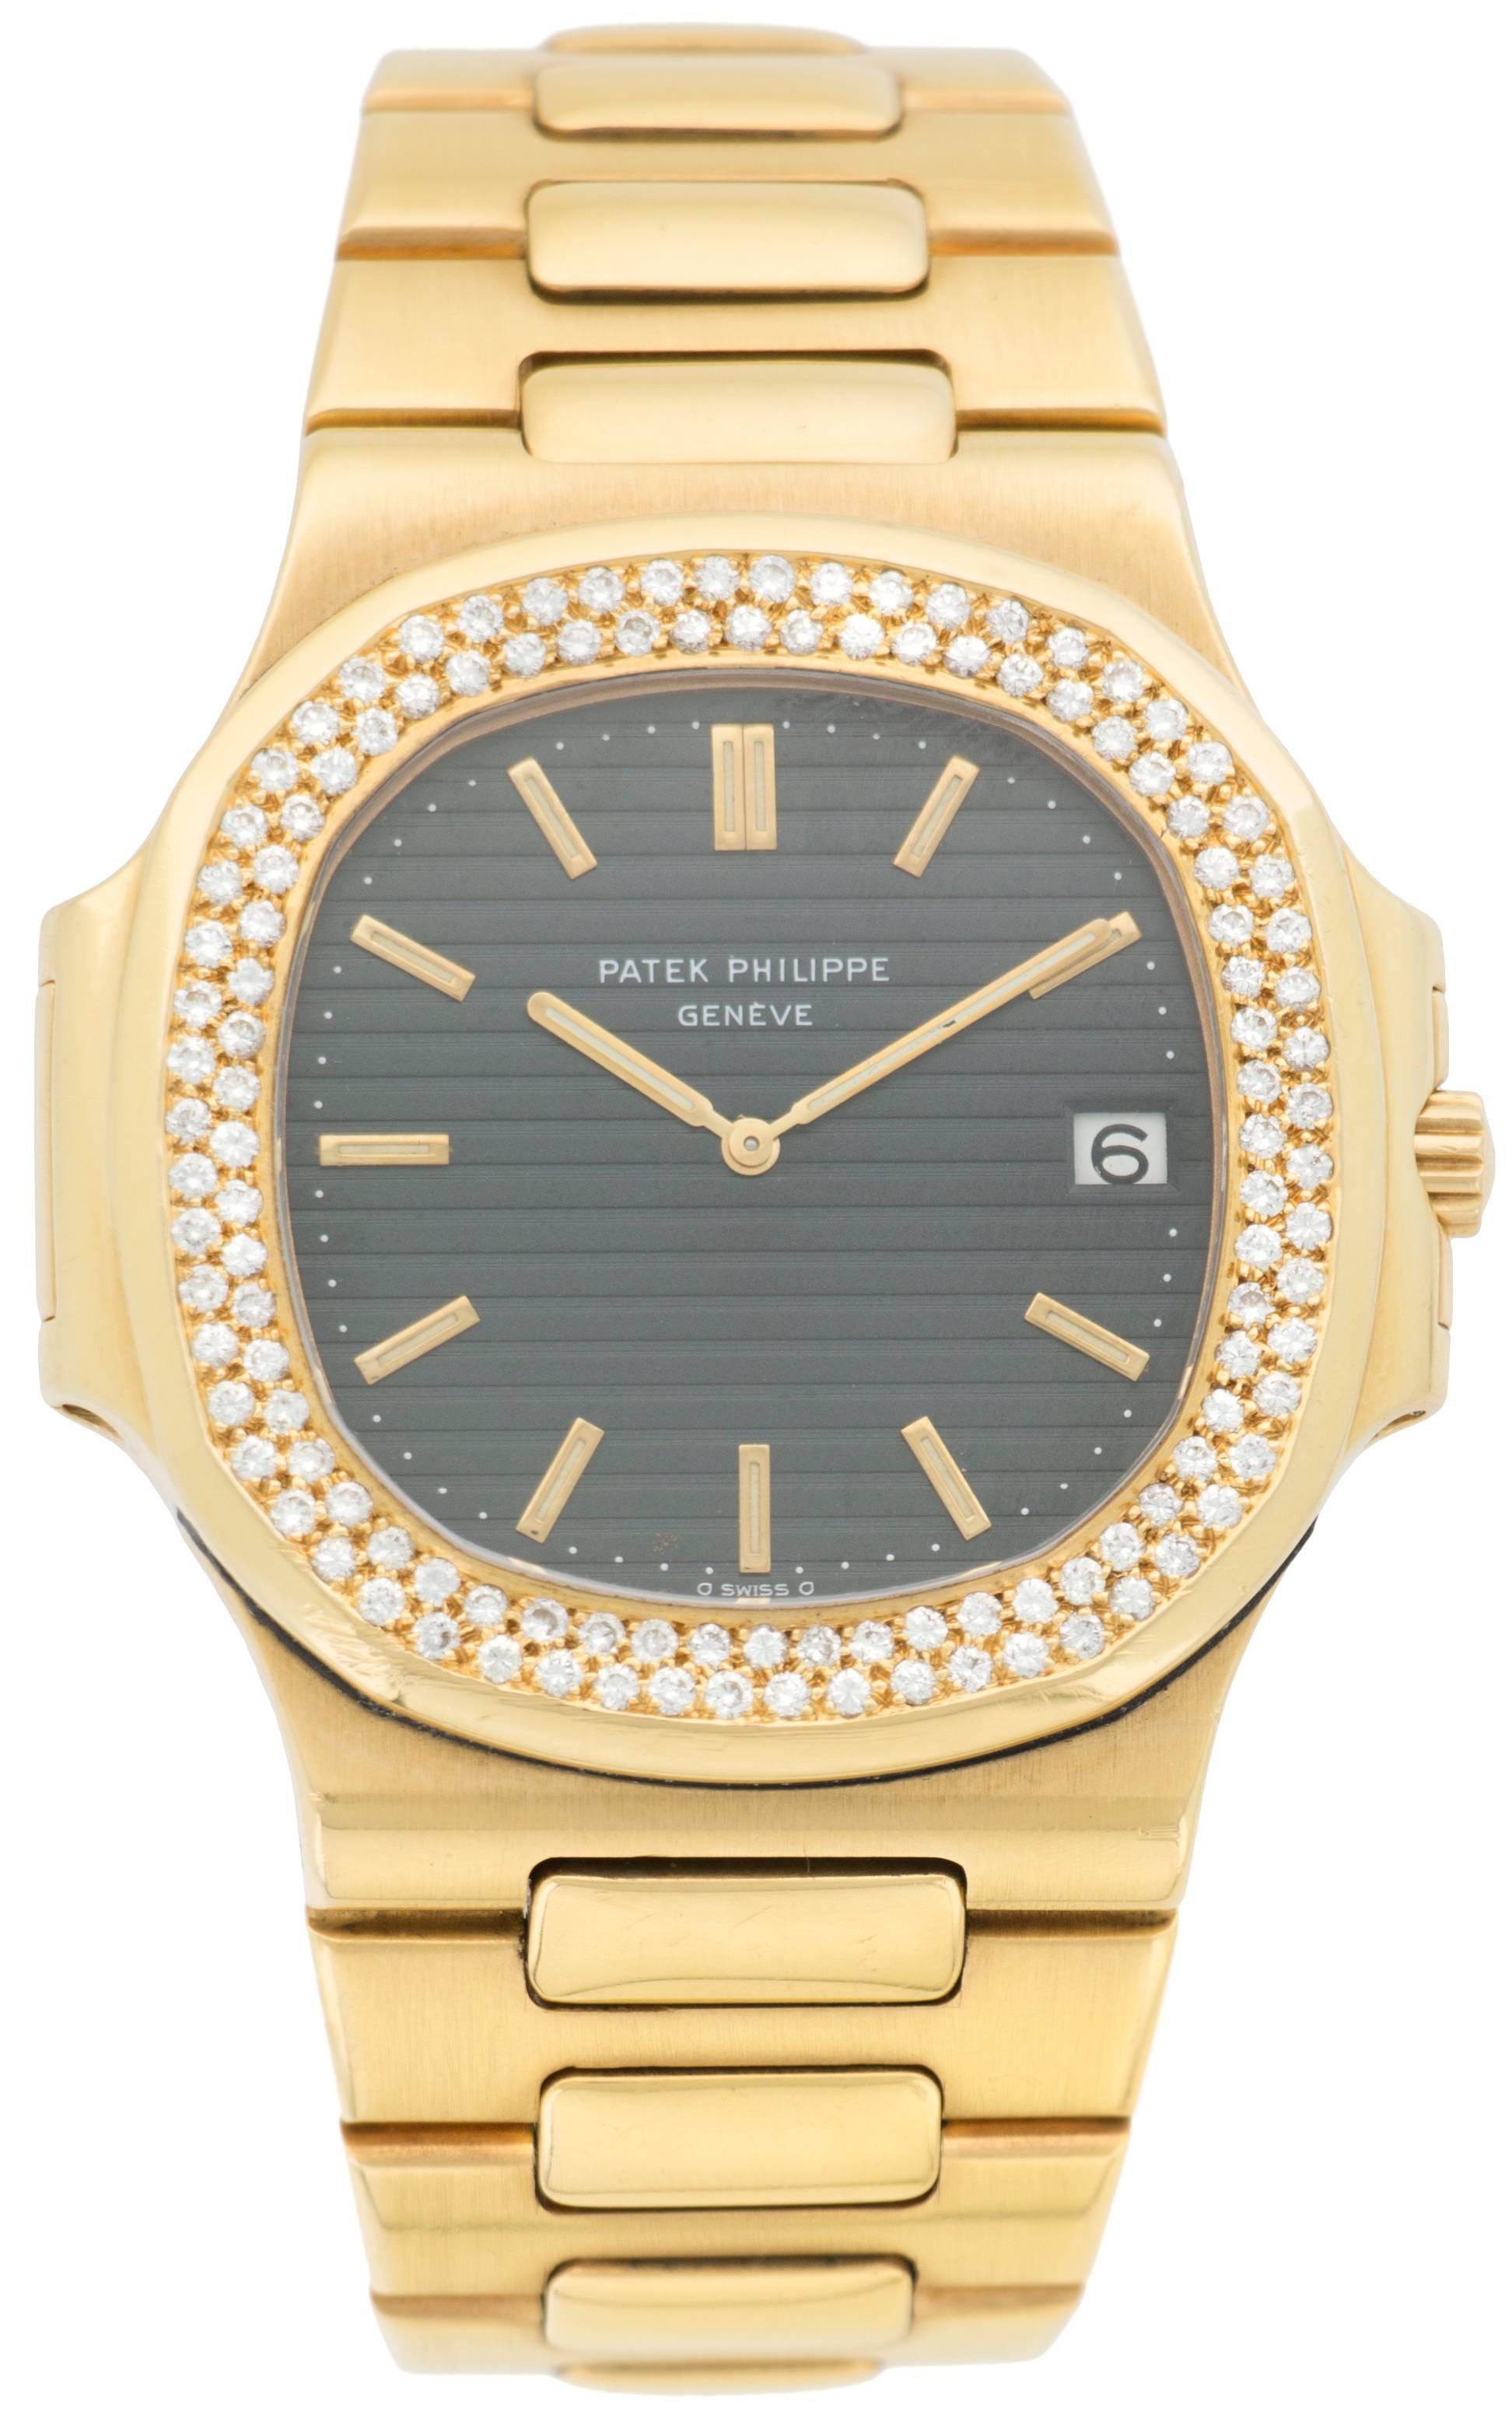 Originally released in 1976, the Patek Philippe Nautilus was one of watchmaking's most illustrious brands first "dive" into sports watches. This incredibly sleek, elegant watch become Patek Philippe's staple sports watch, well known for